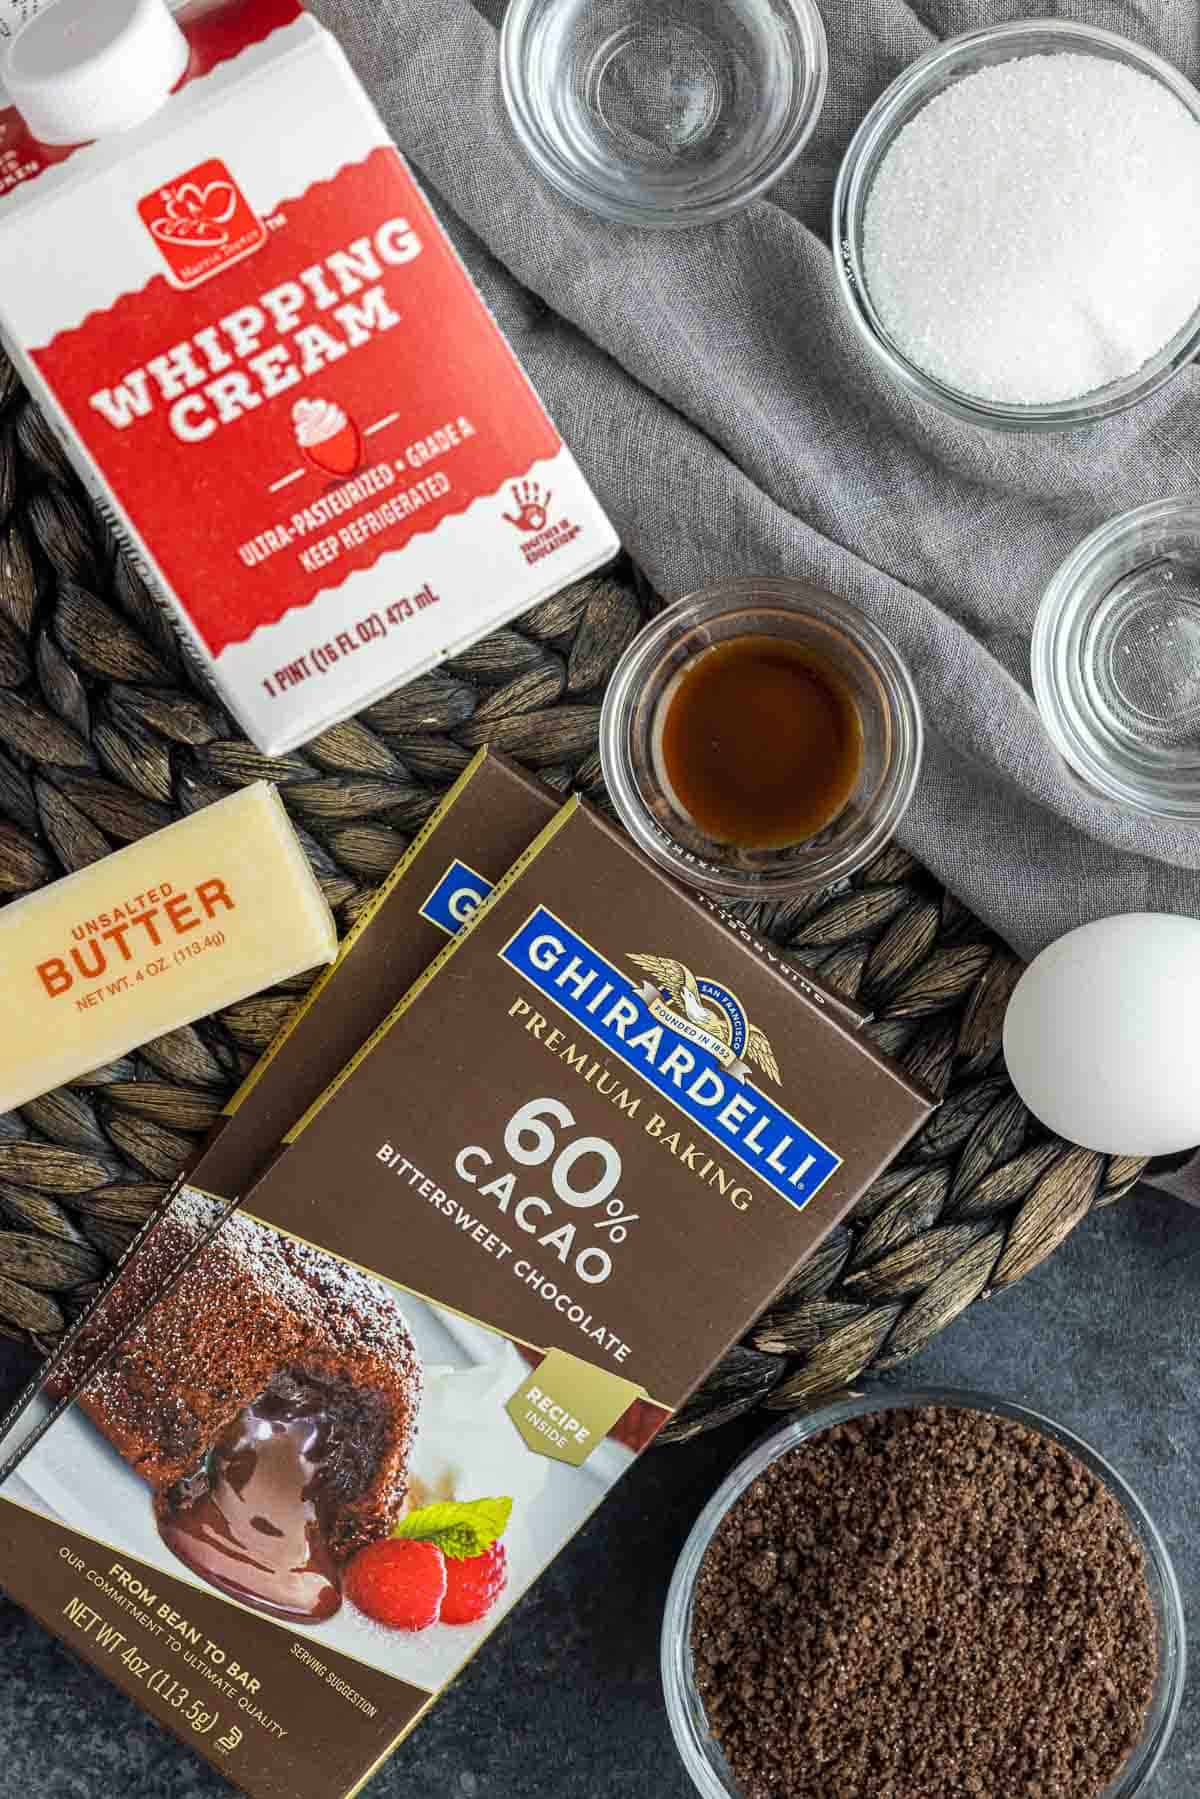 ingredients to make a Decadent Chocolate Tart